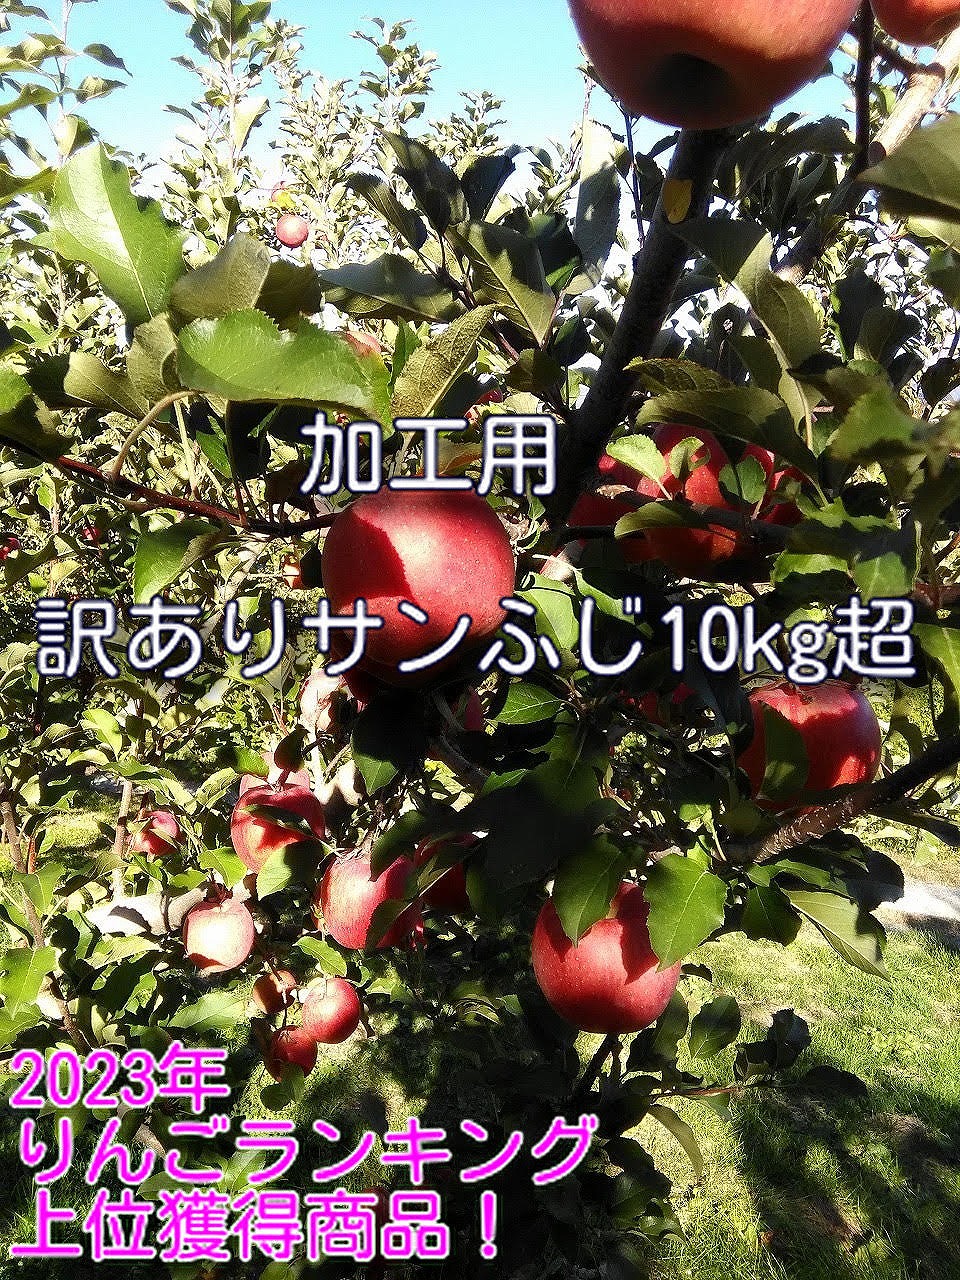  reservation goods sun .. processing for rose ..10kg juice jam confection making optimum Okinawa prefecture shipping is not possible 